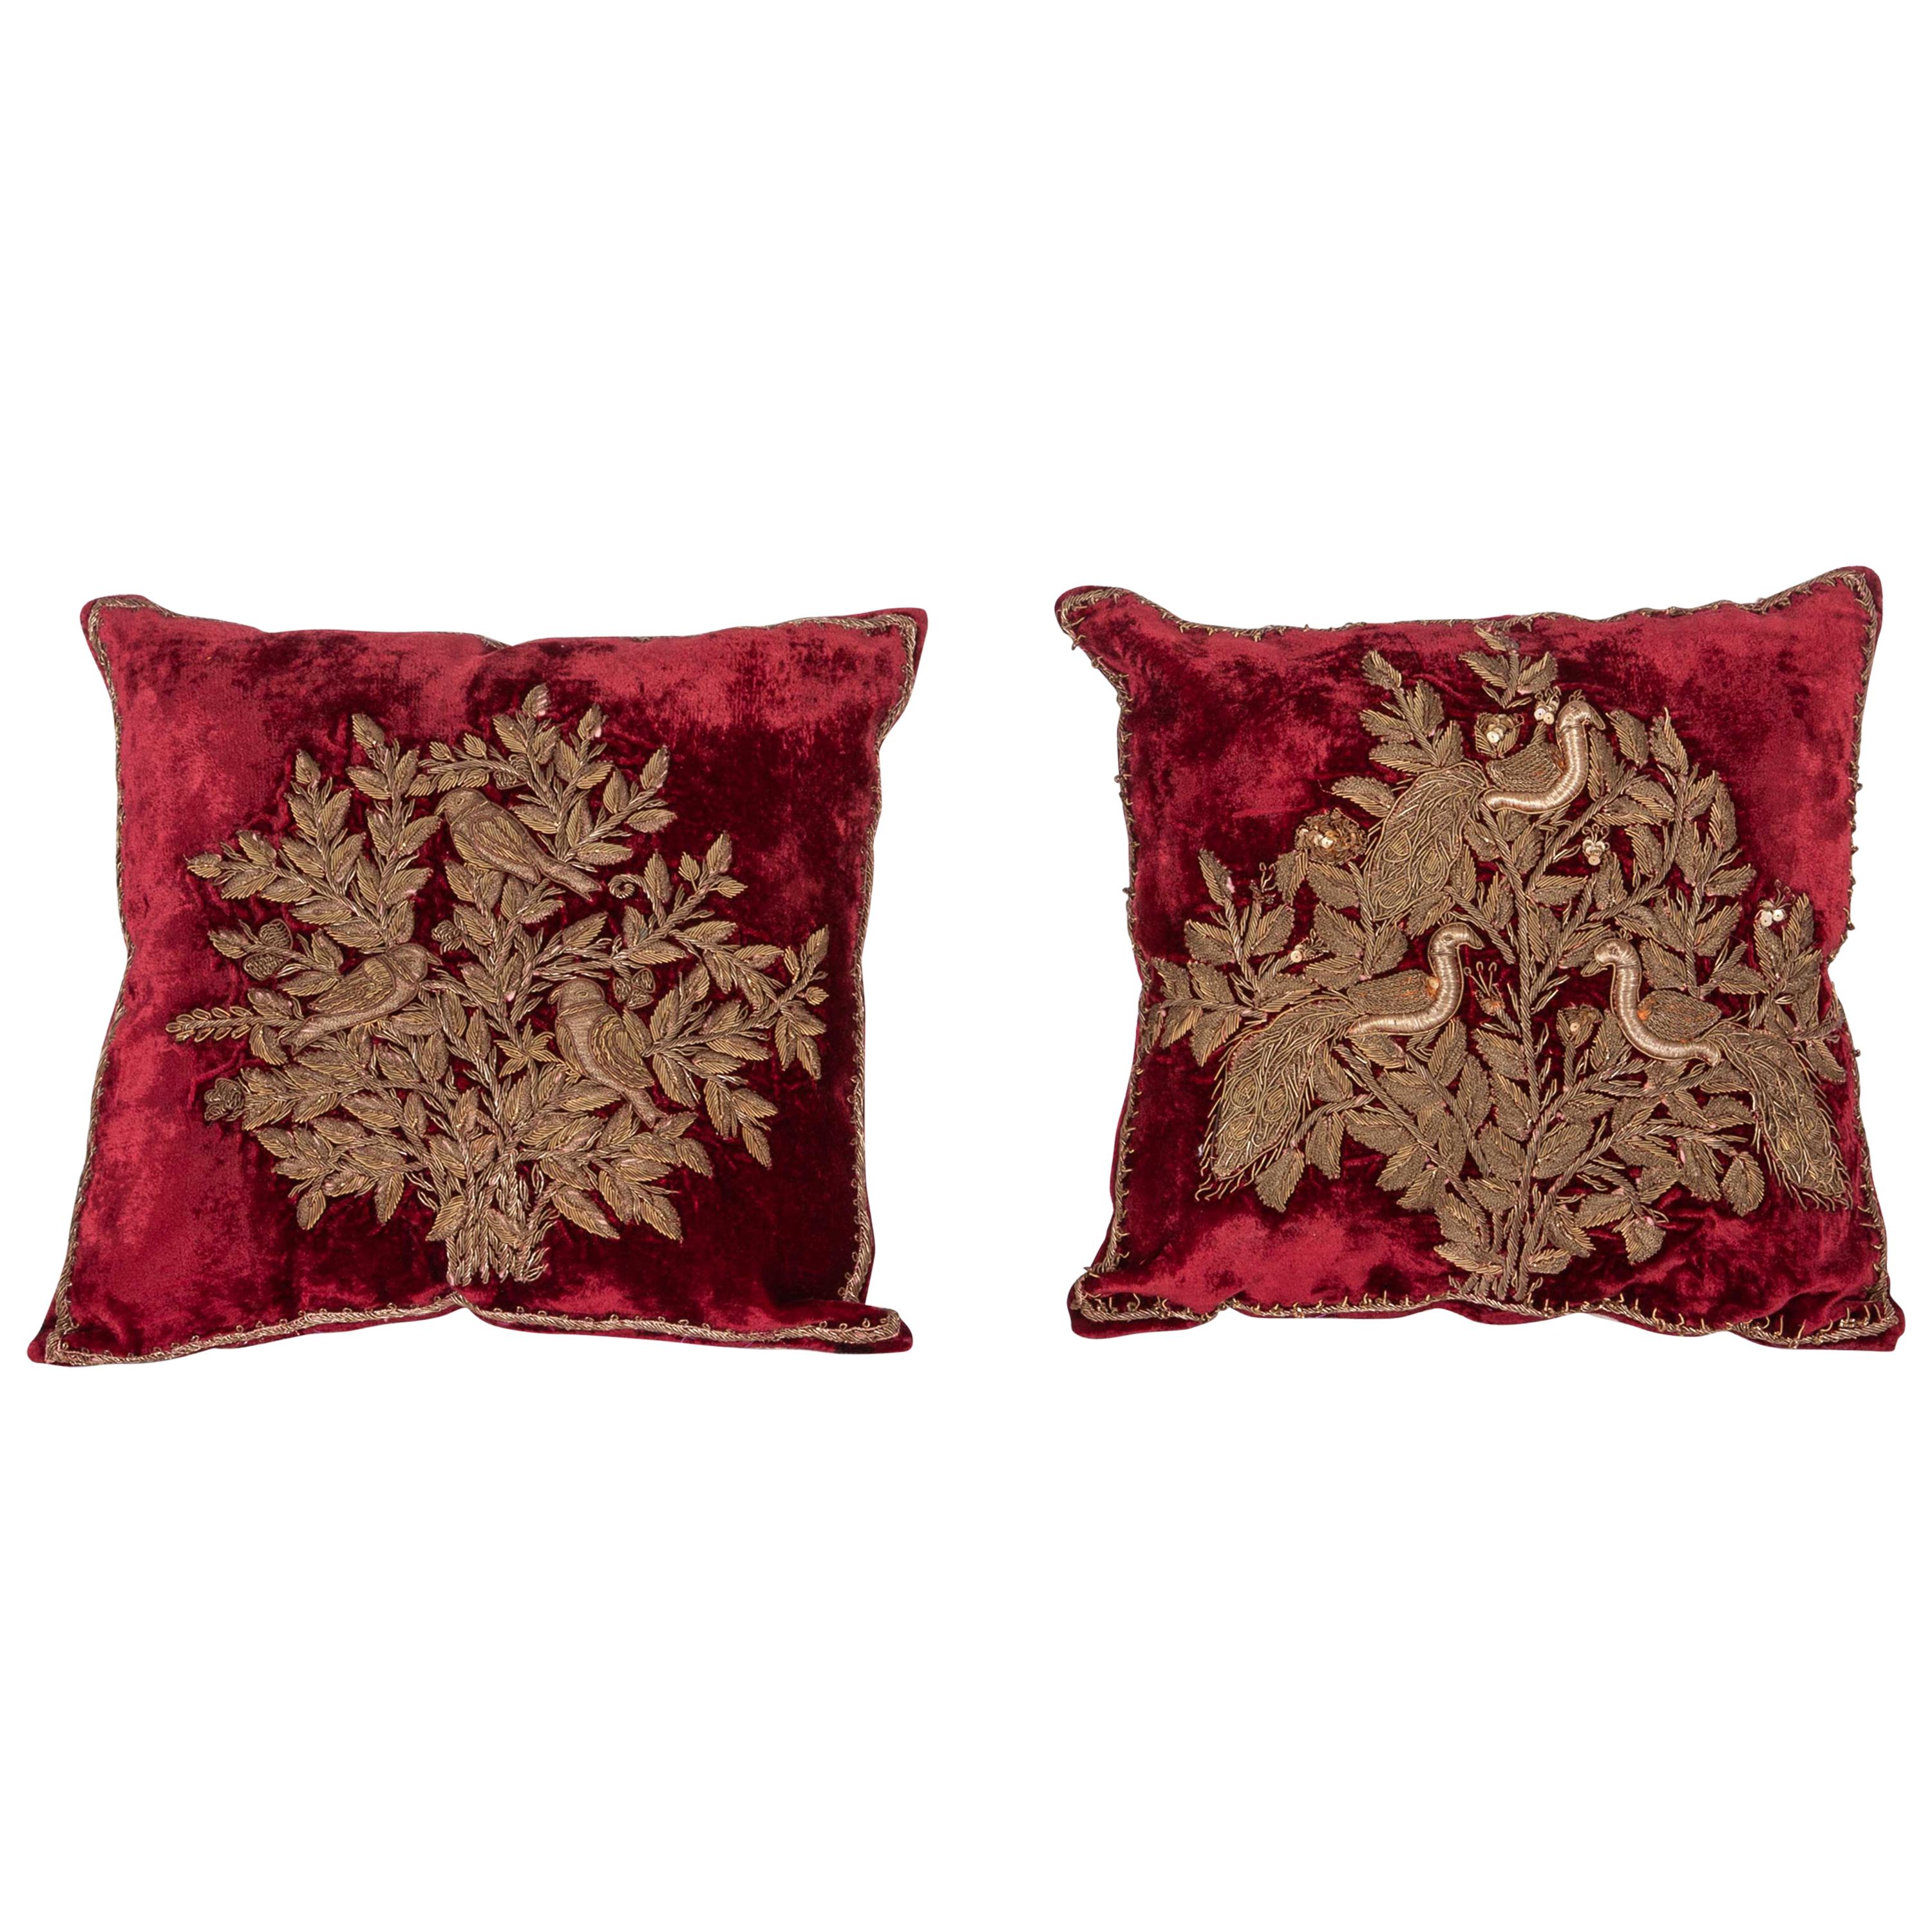 Silk Velvet Pillow Cases with Metallic Embroidery from India, Early 20th Century